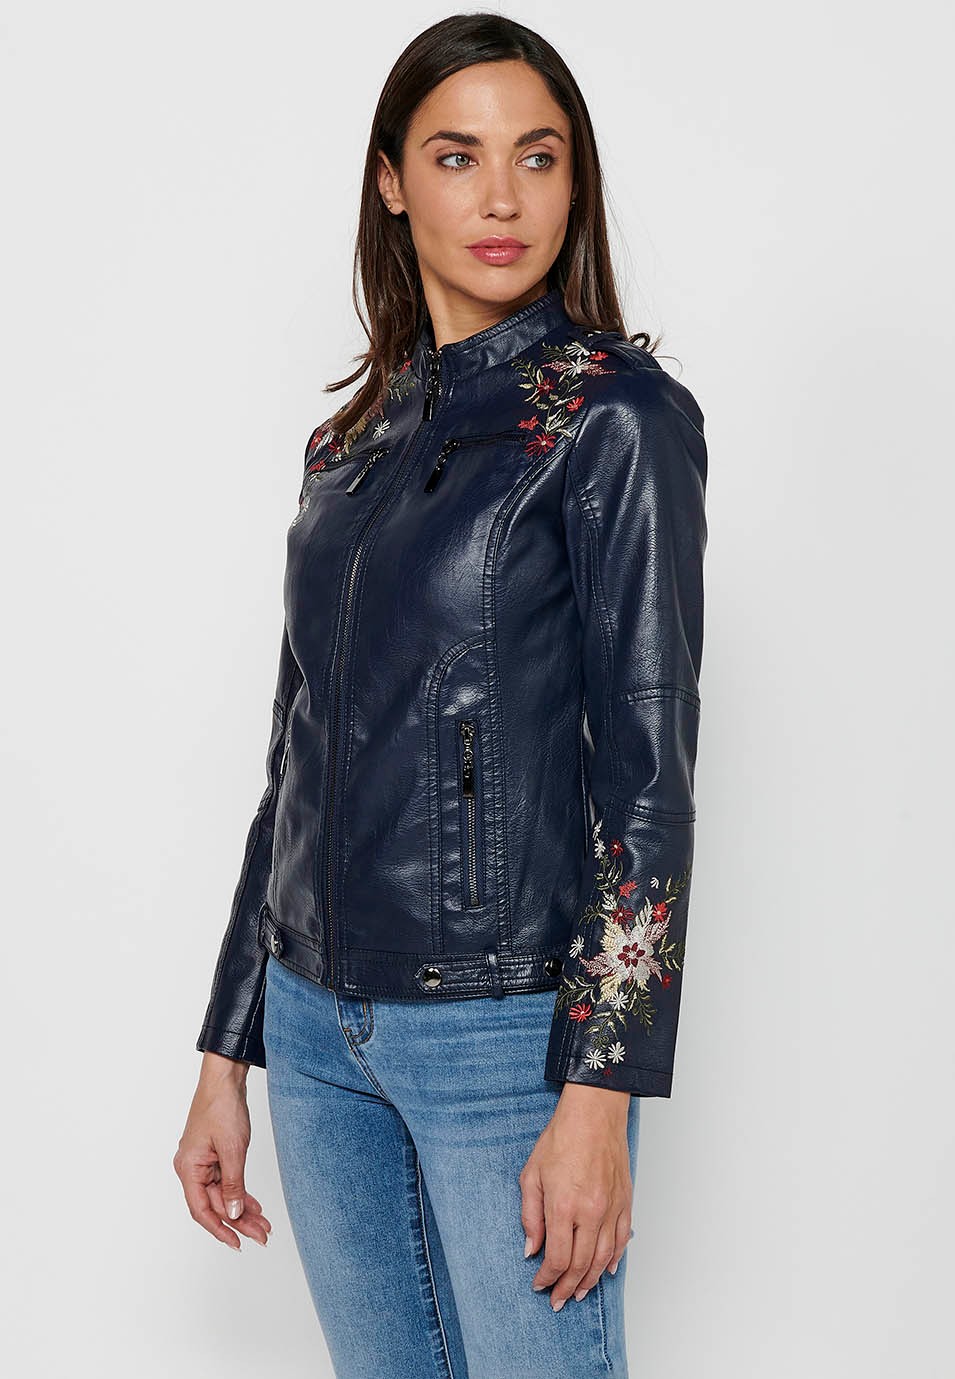 Leather-effect jacket with front zipper closure with floral embroidered details with round neck and front pockets in Navy for Women 7